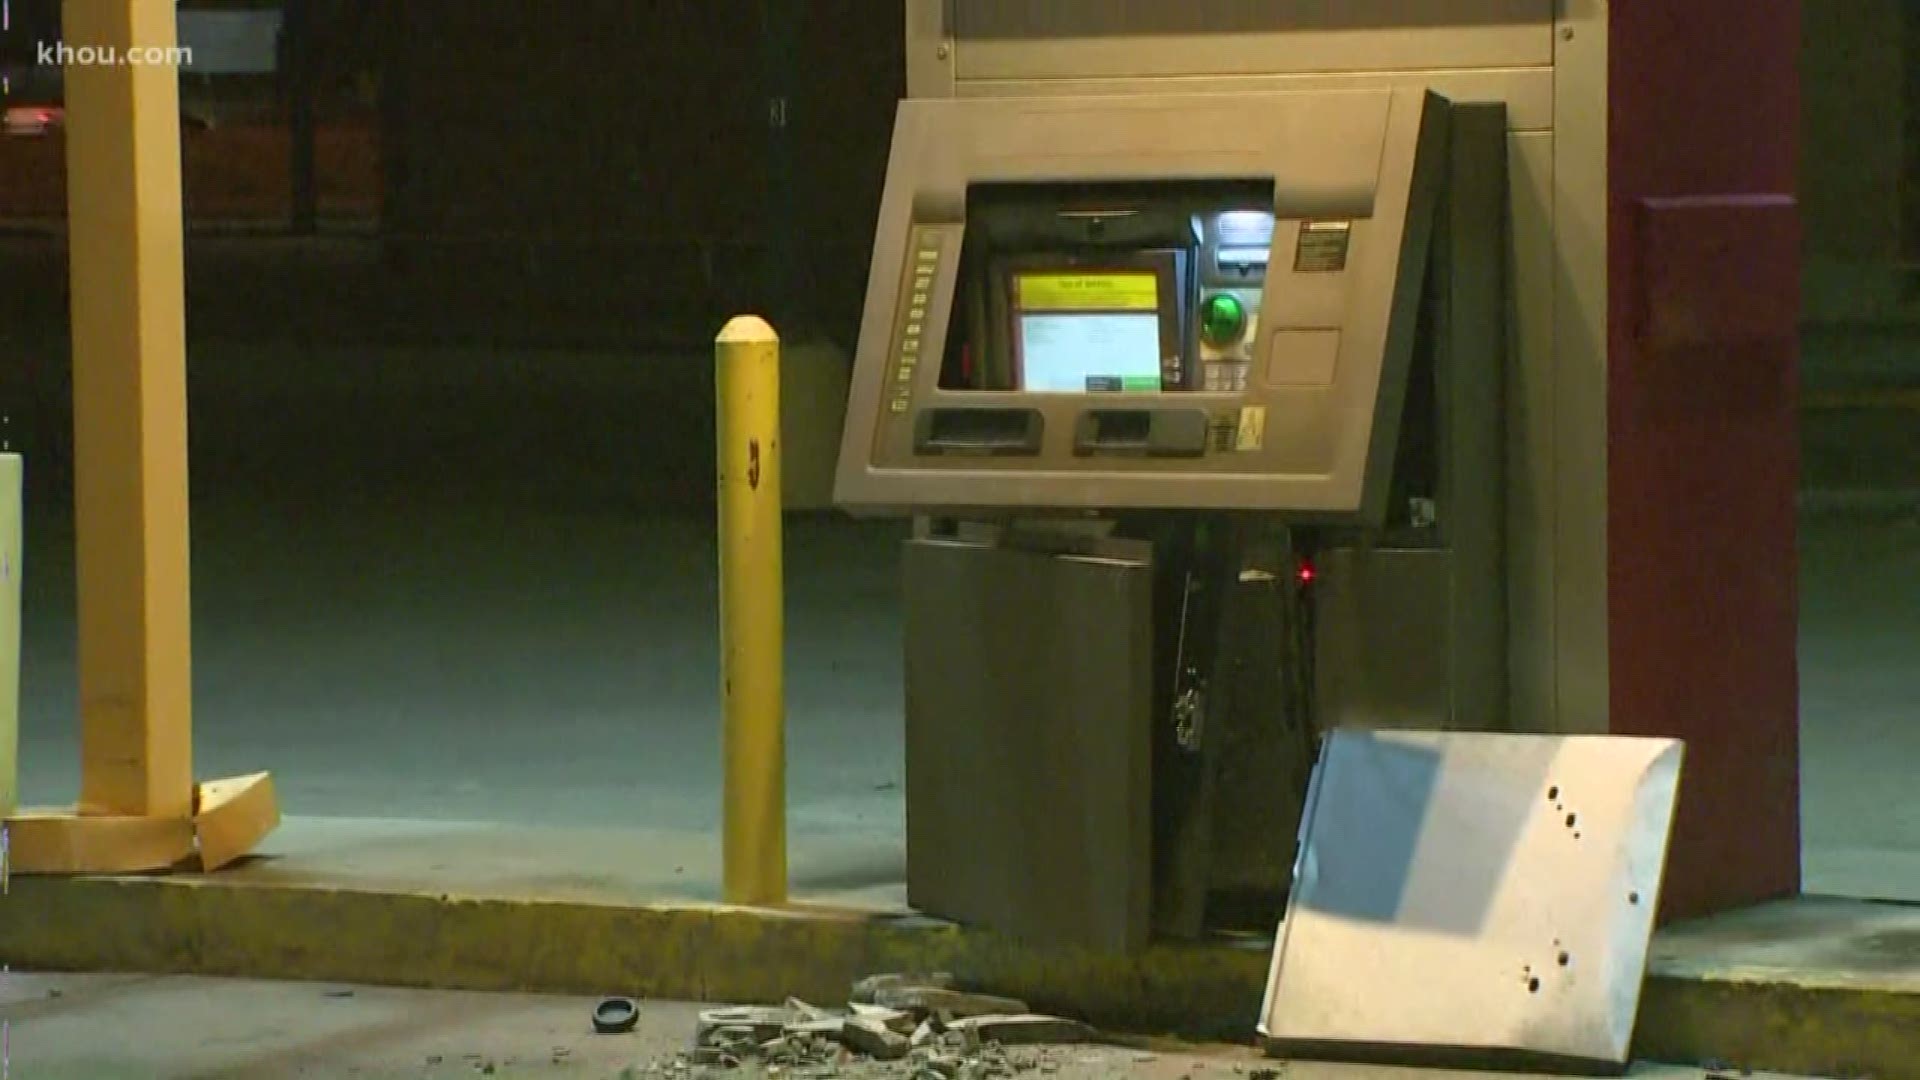 Thieves smashed up a Wells Fargo ATM trying to steal it overnight. It appears those thieves tried to use a stolen U-Haul truck to break into the ATM.